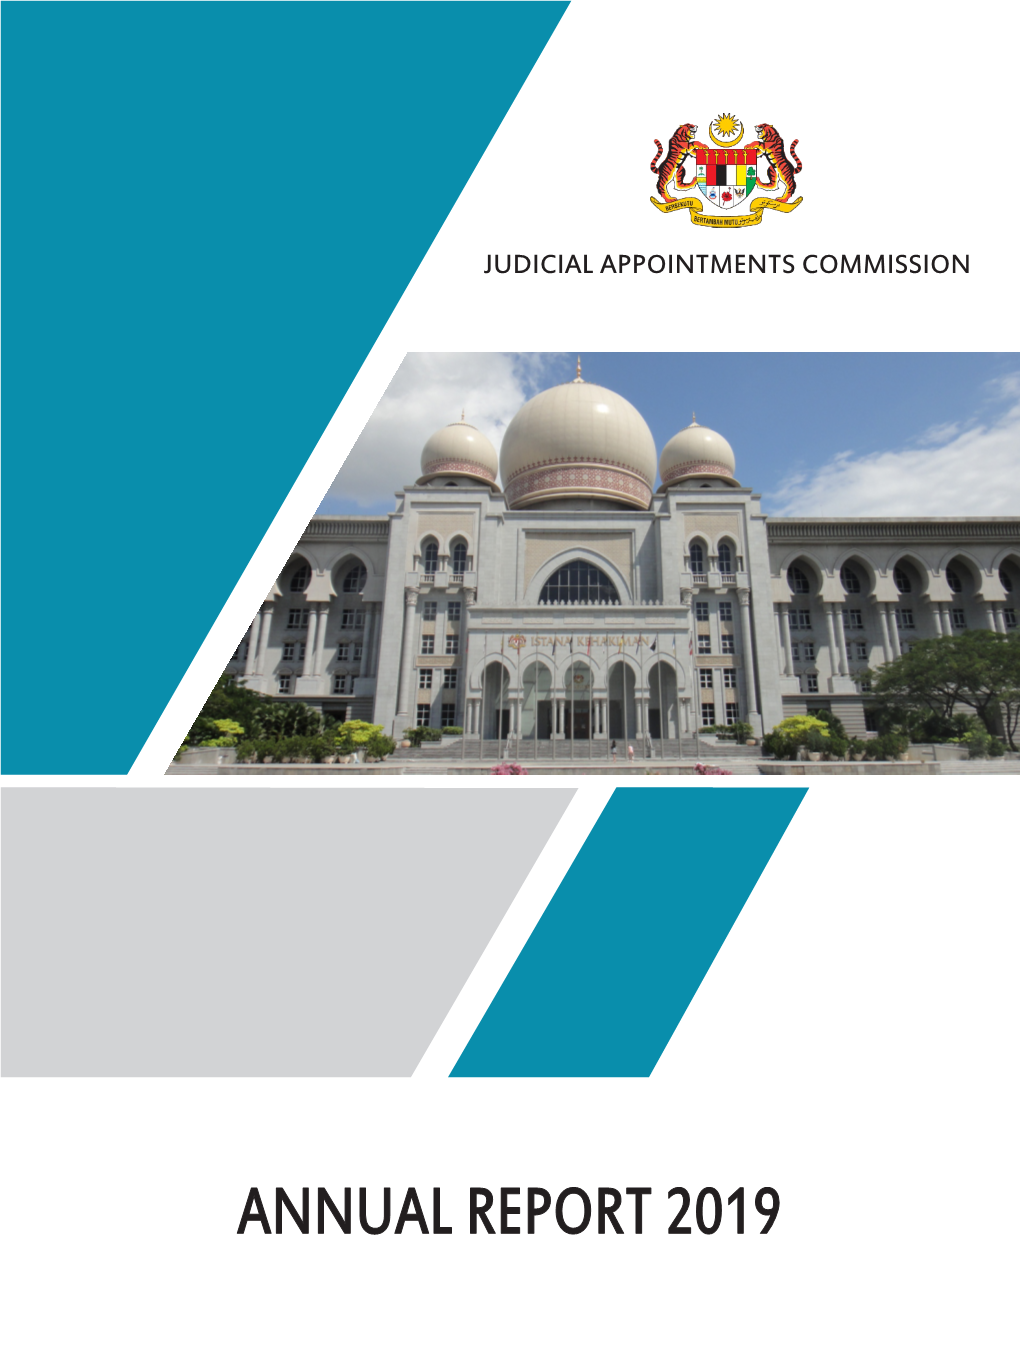 Annual Report 2019 Judicial Appointments Commission